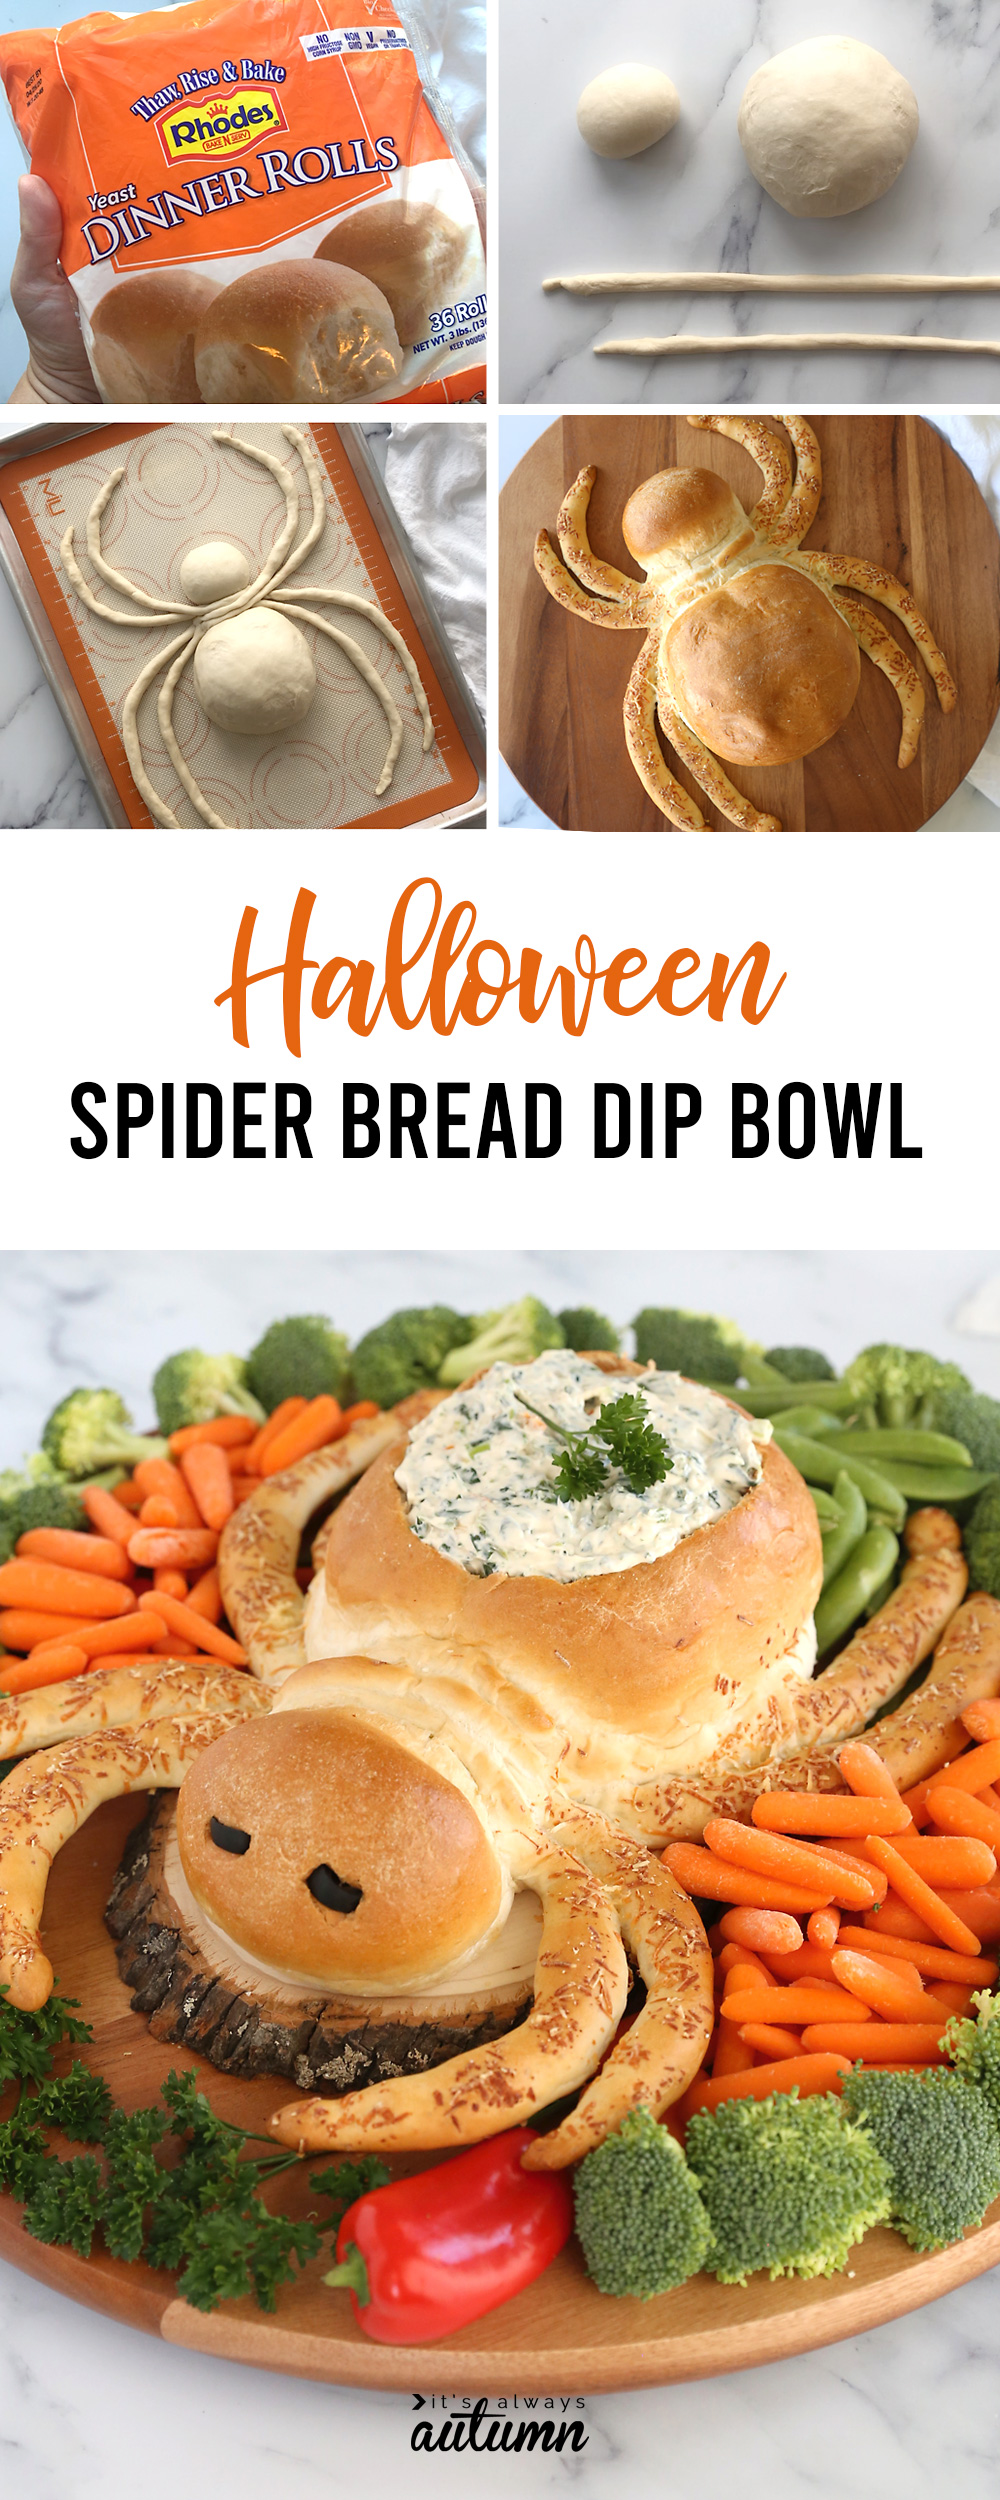 Halloween spider bread dip bowl surrounded by vegetables